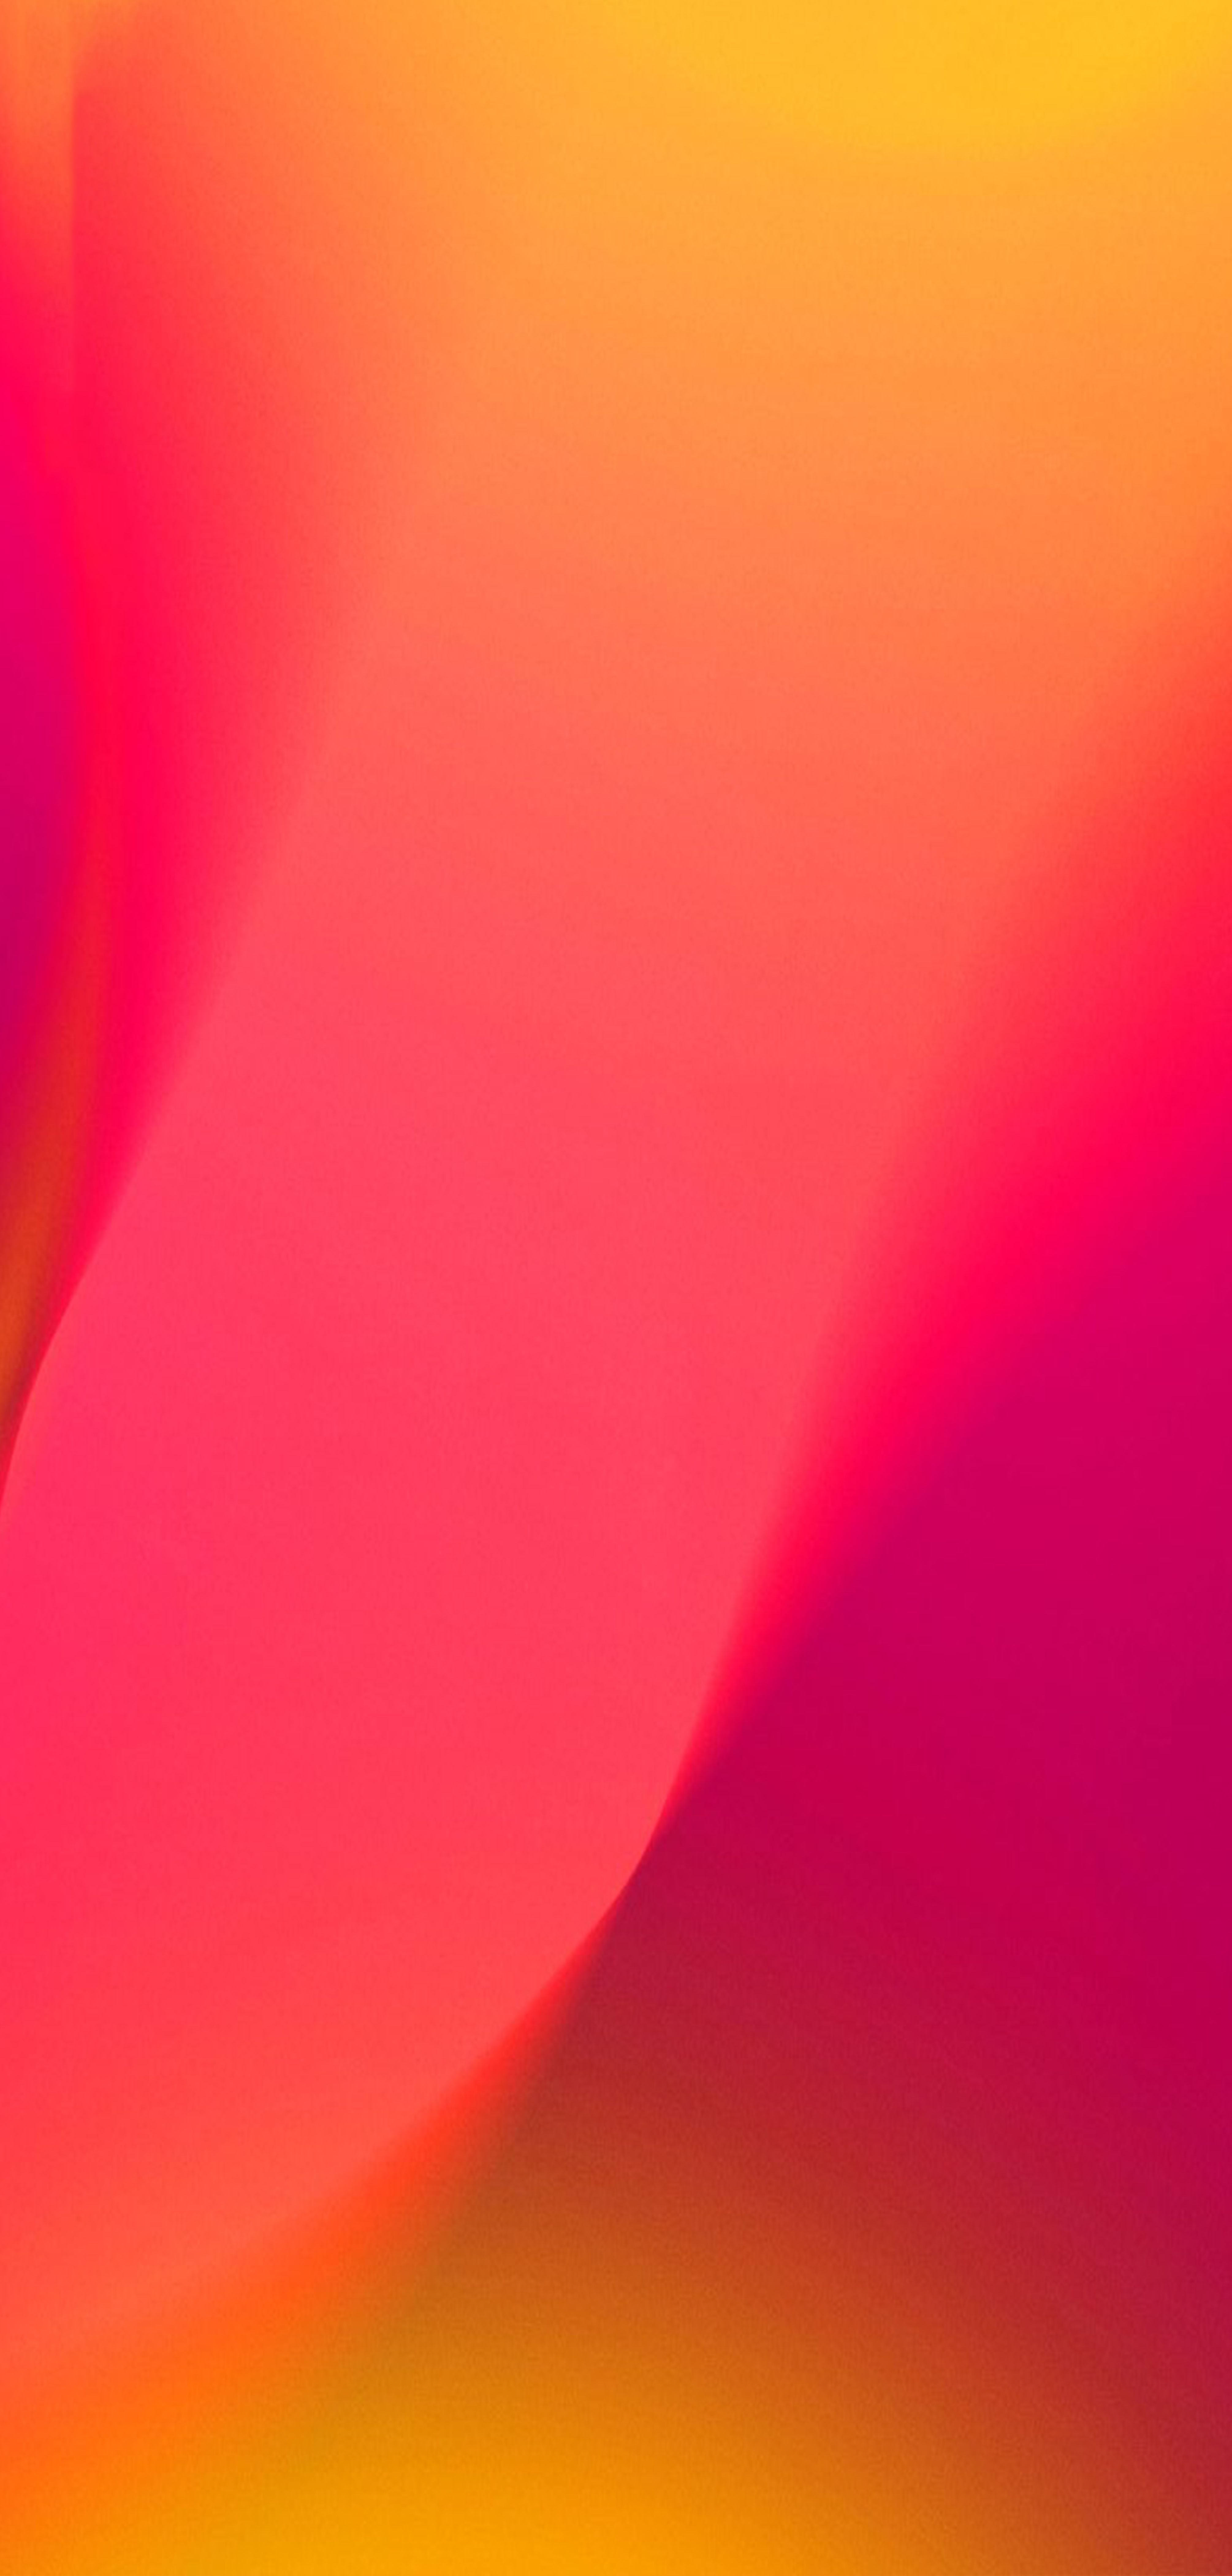 Best iPhone and Android Wallpaper: Vibrant Shapes & Gradients Background for iPhone and A. iPhone wallpaper gradient, iPhone wallpaper sky, Pink wallpaper iphone